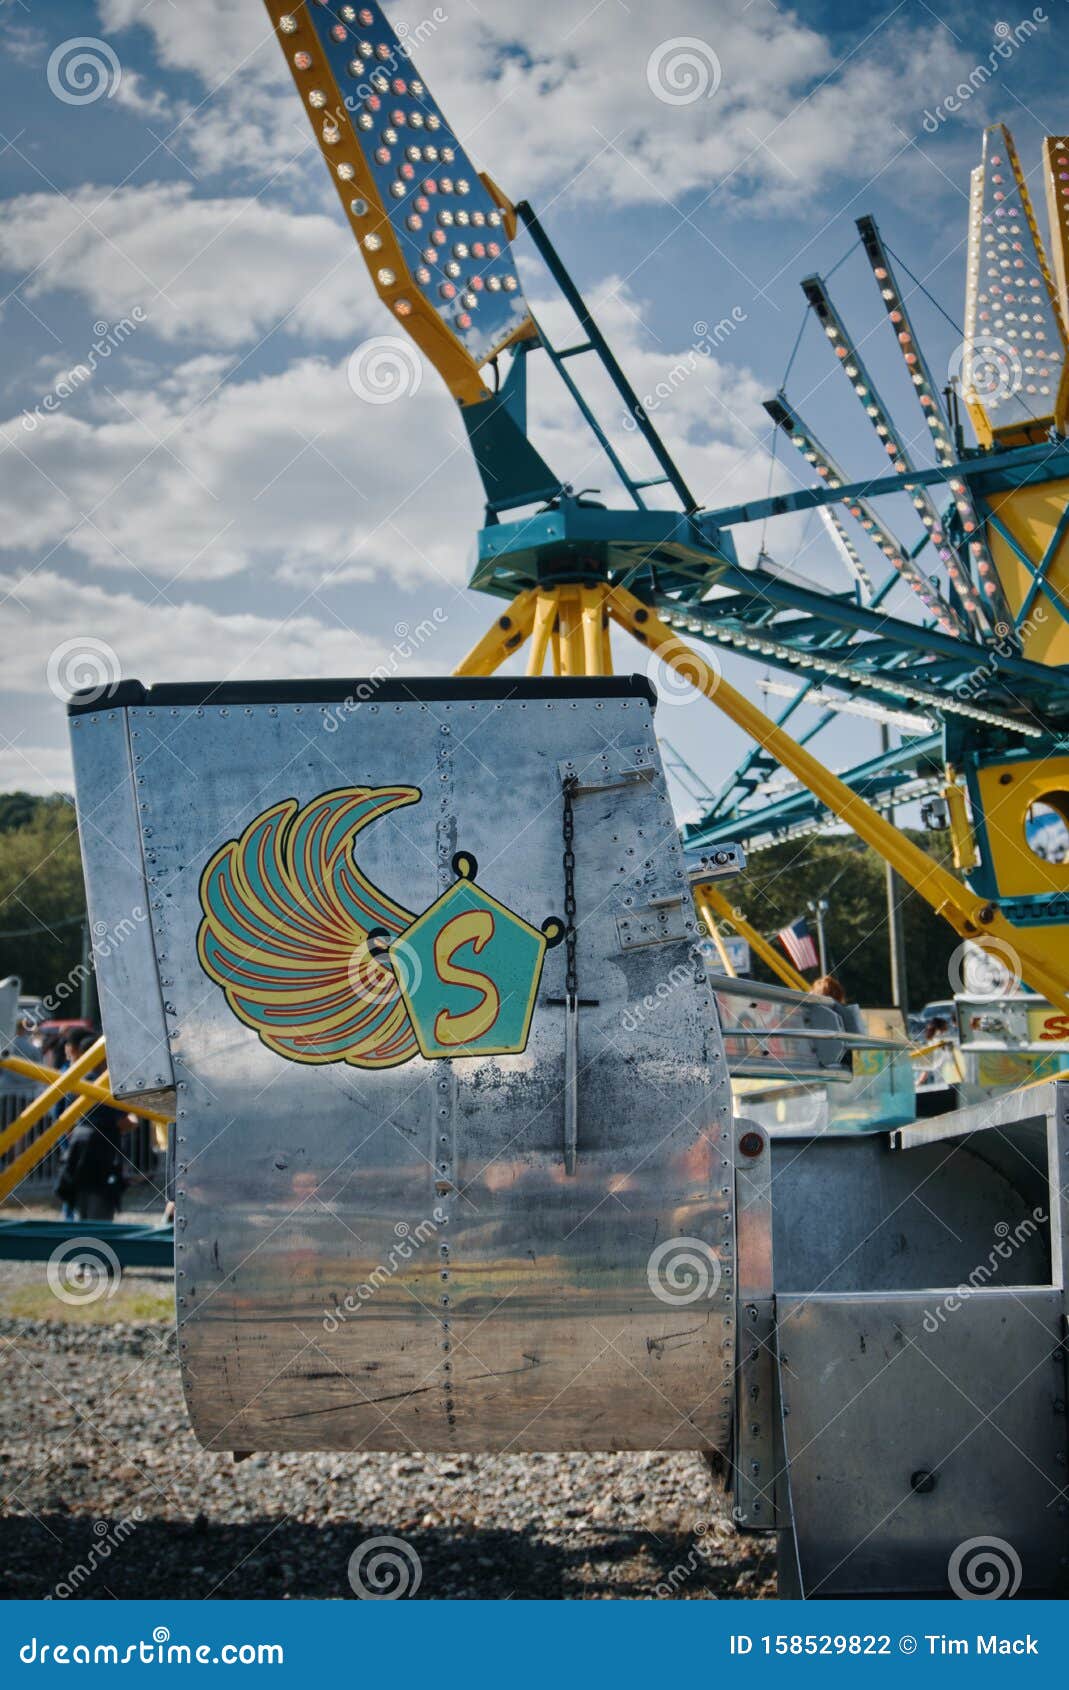 Egg Scrambler Ride At A Local Carnival Fair Editorial Photography Image Of Lights Authentic